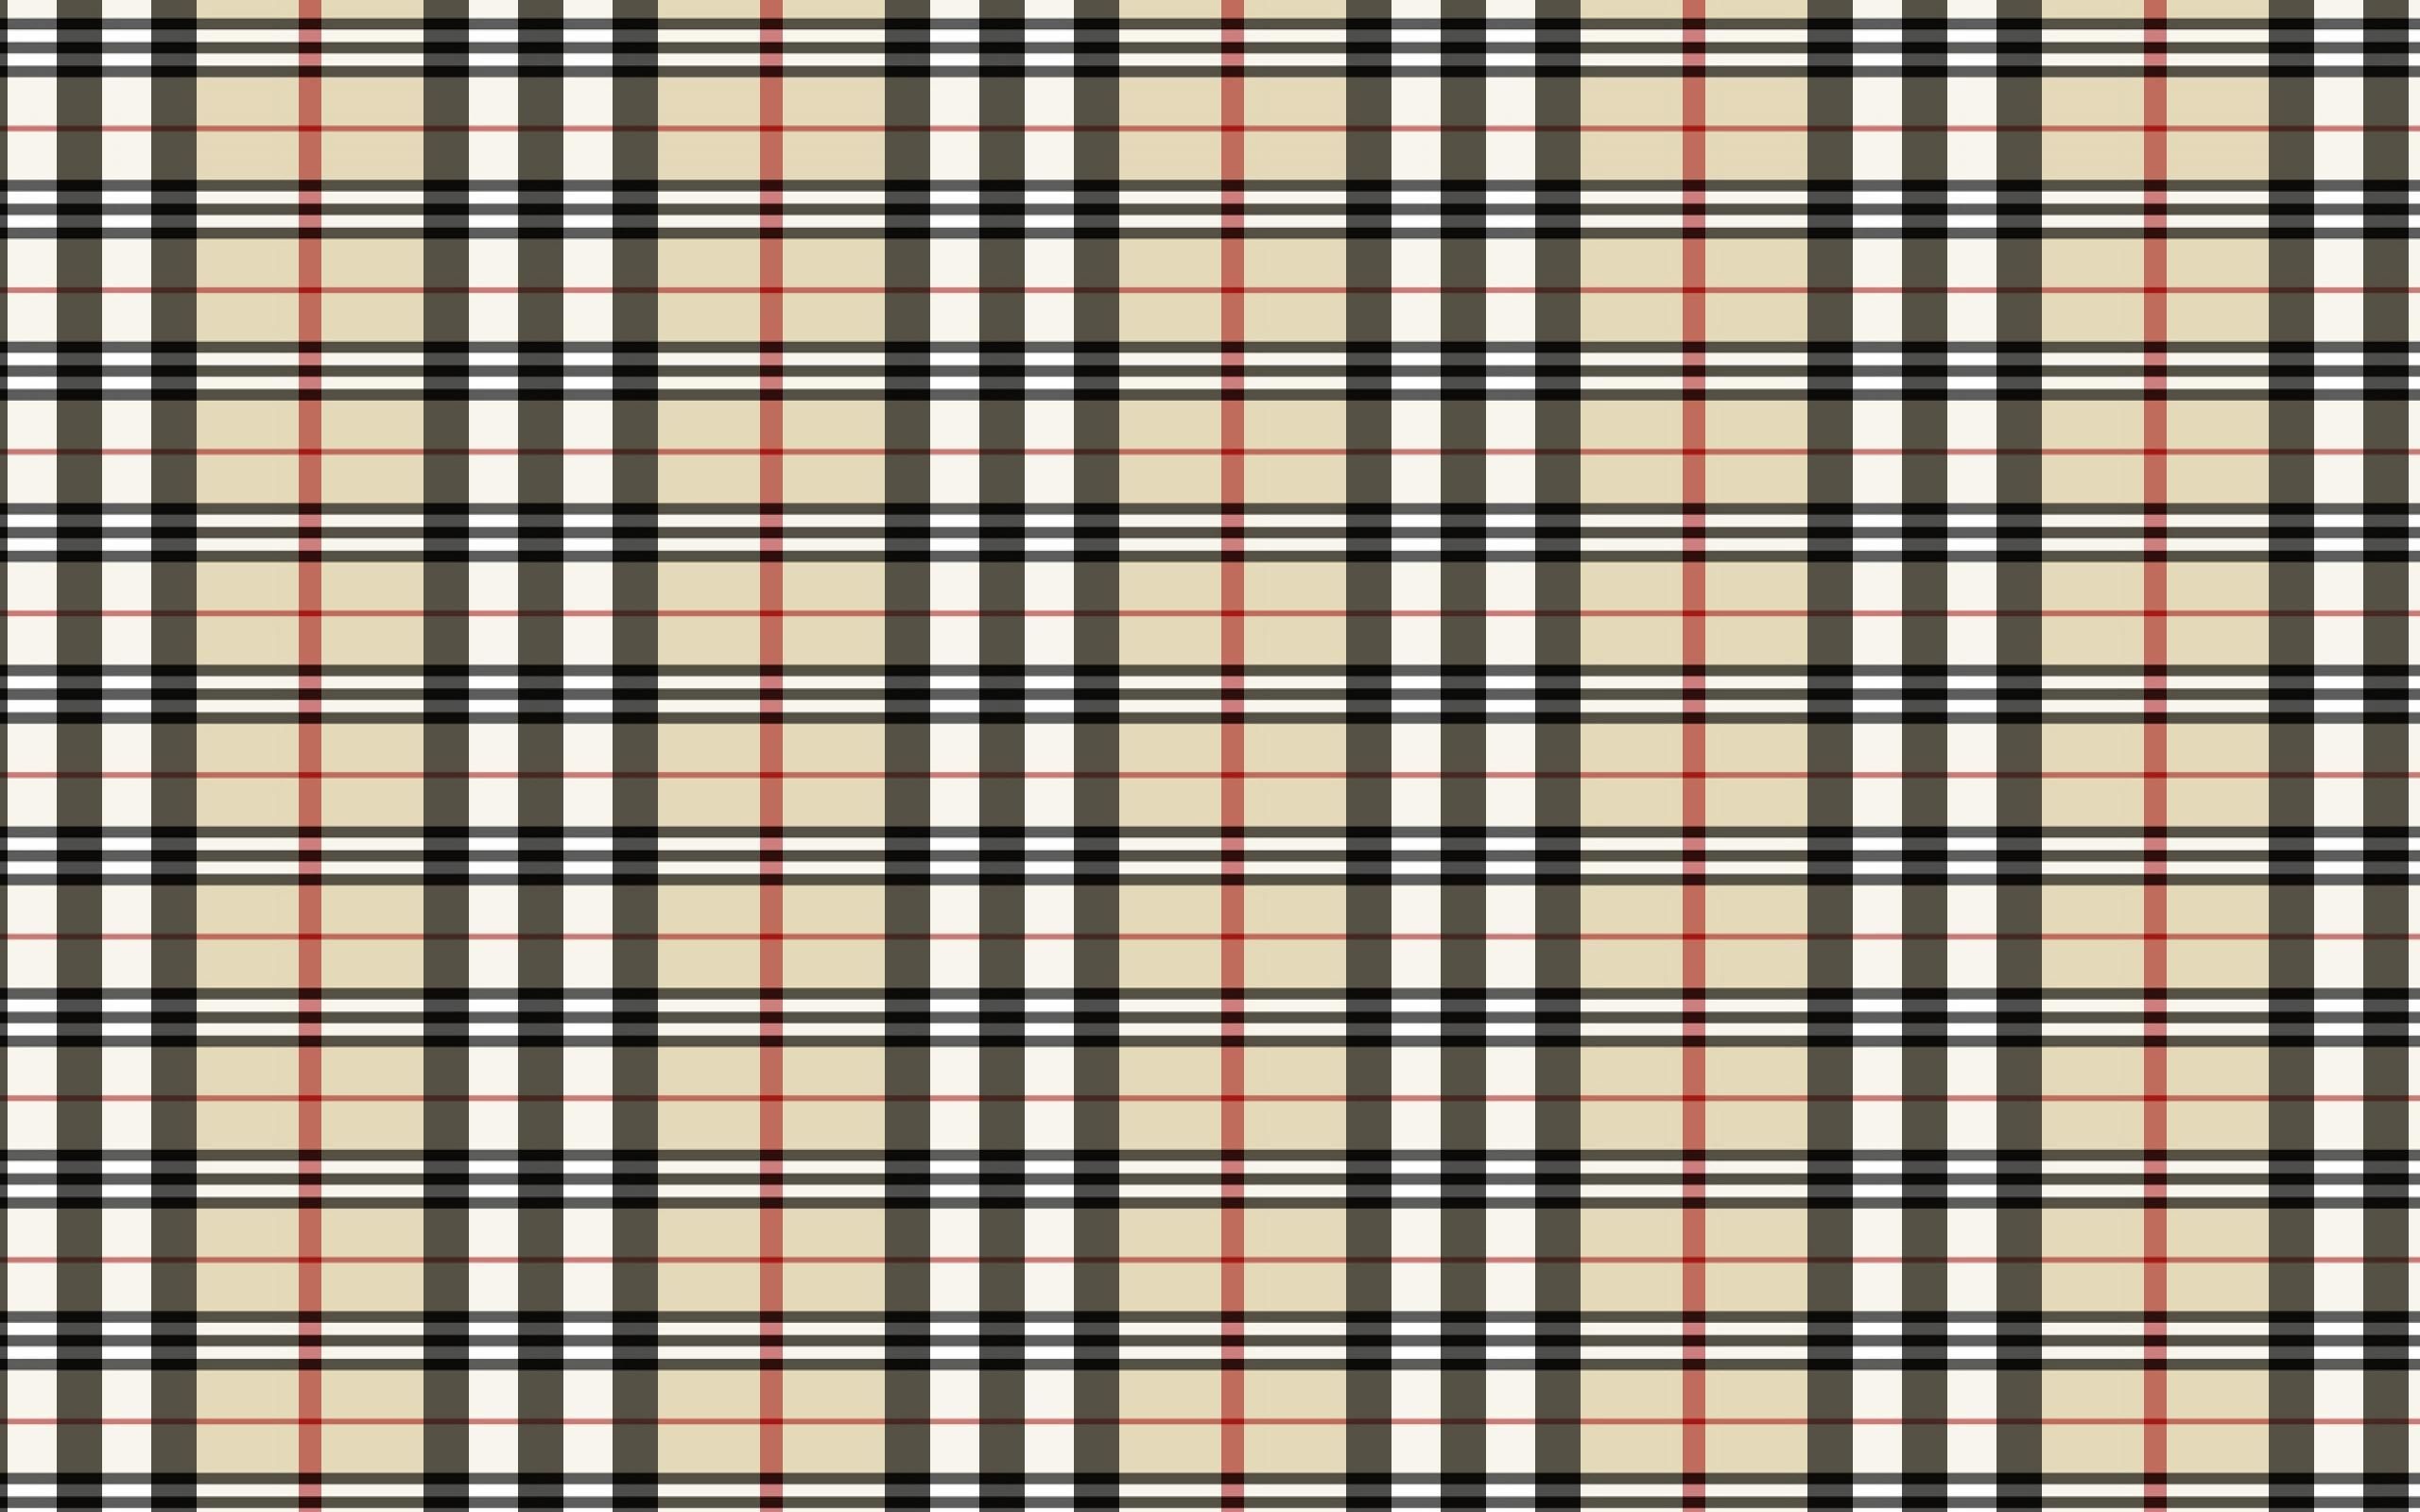 Burberry: Classic check pattern trademarked in 1921, Iconic British brand. 2560x1600 HD Wallpaper.